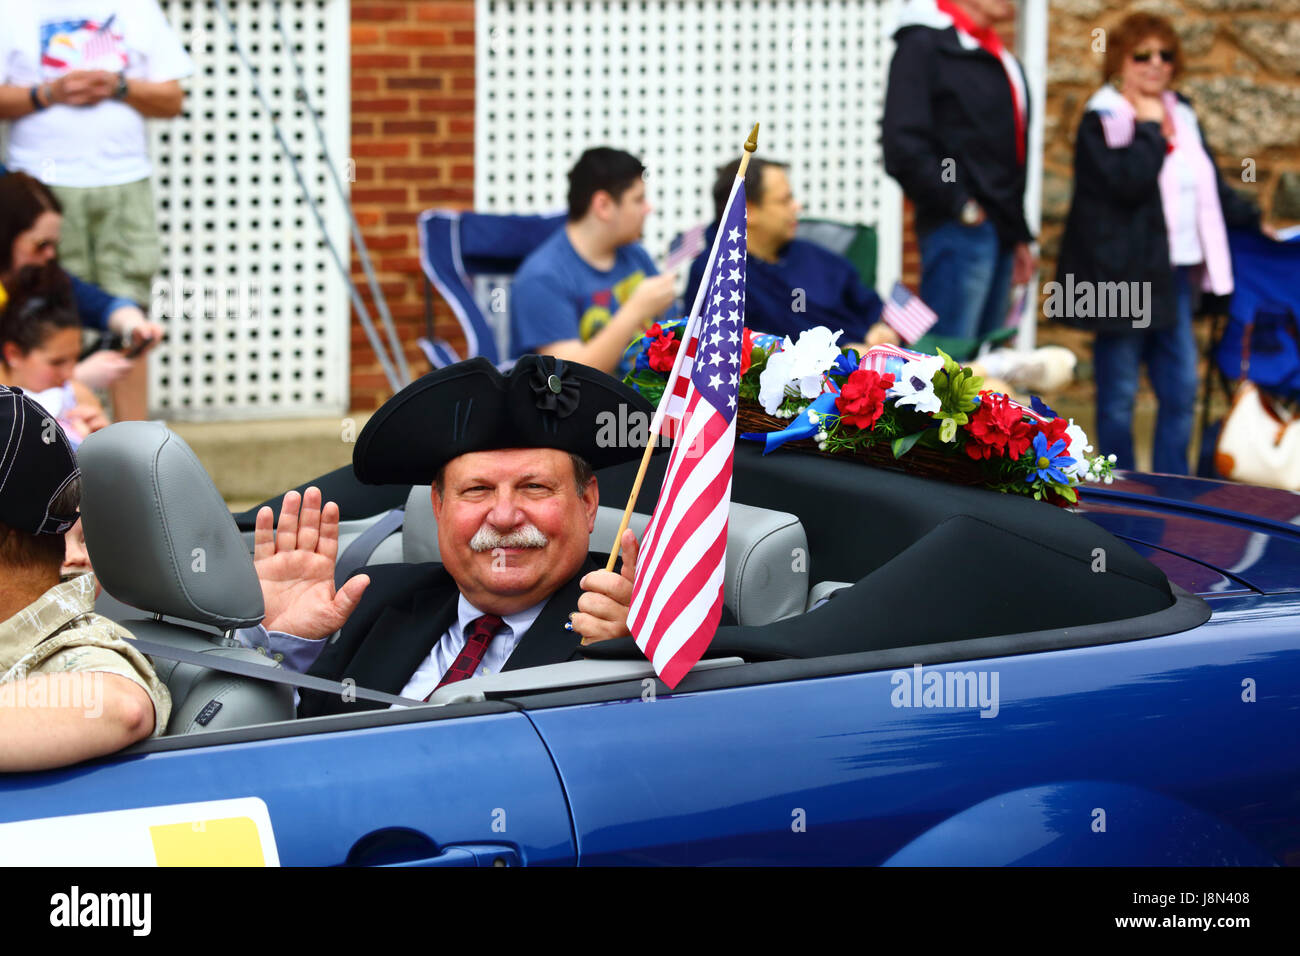 Westminster, Maryland, USA. 29th May, 2017. A veteran waves to spectators while taking part in parades for Memorial Day, a federal holiday in the United States for remembering those who died while serving in the country's armed forces. Credit: James Brunker/Alamy Live News Stock Photo